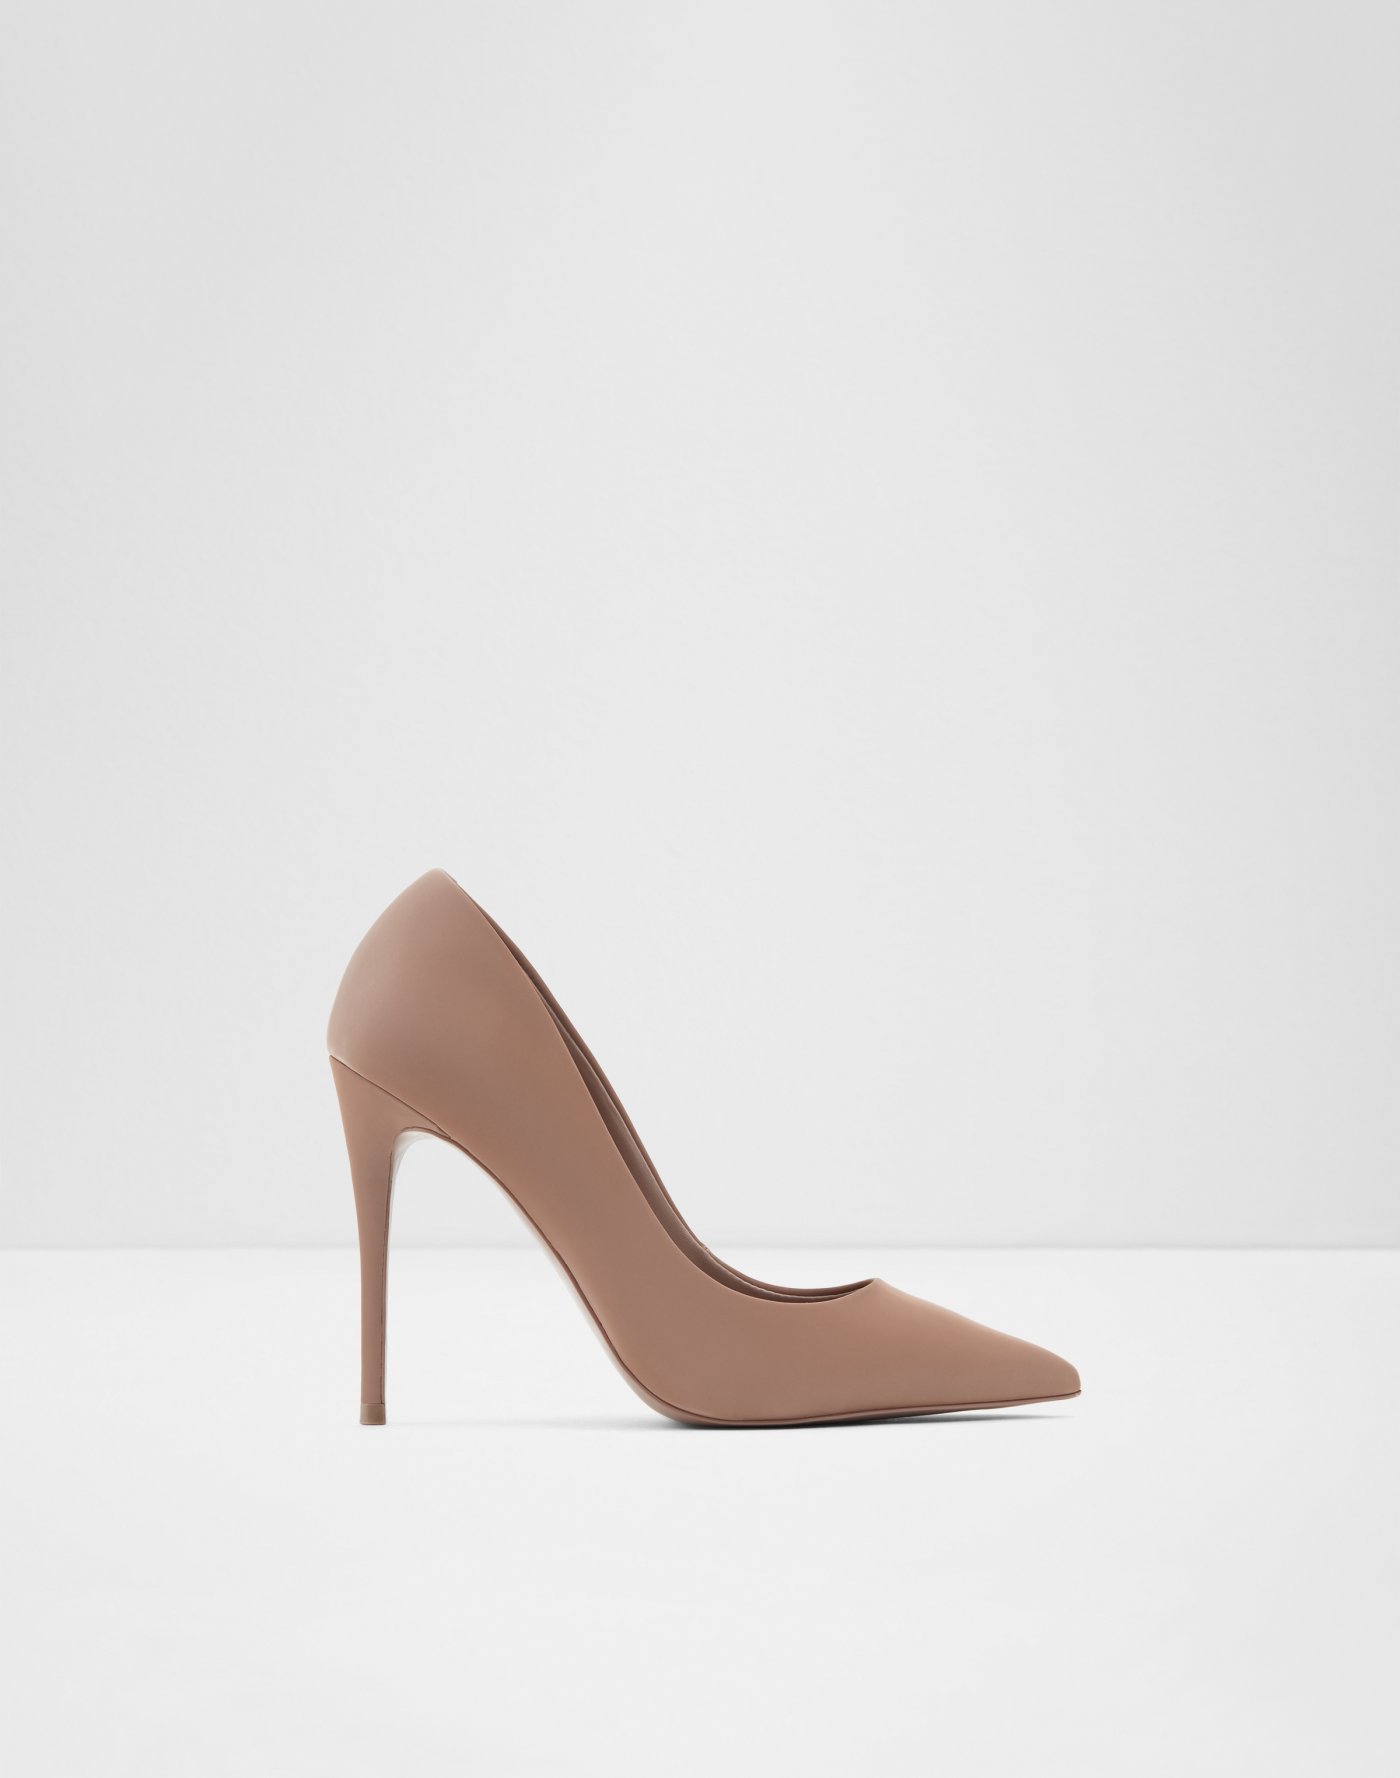 Shoes for Women | All Shoes | ALDO US